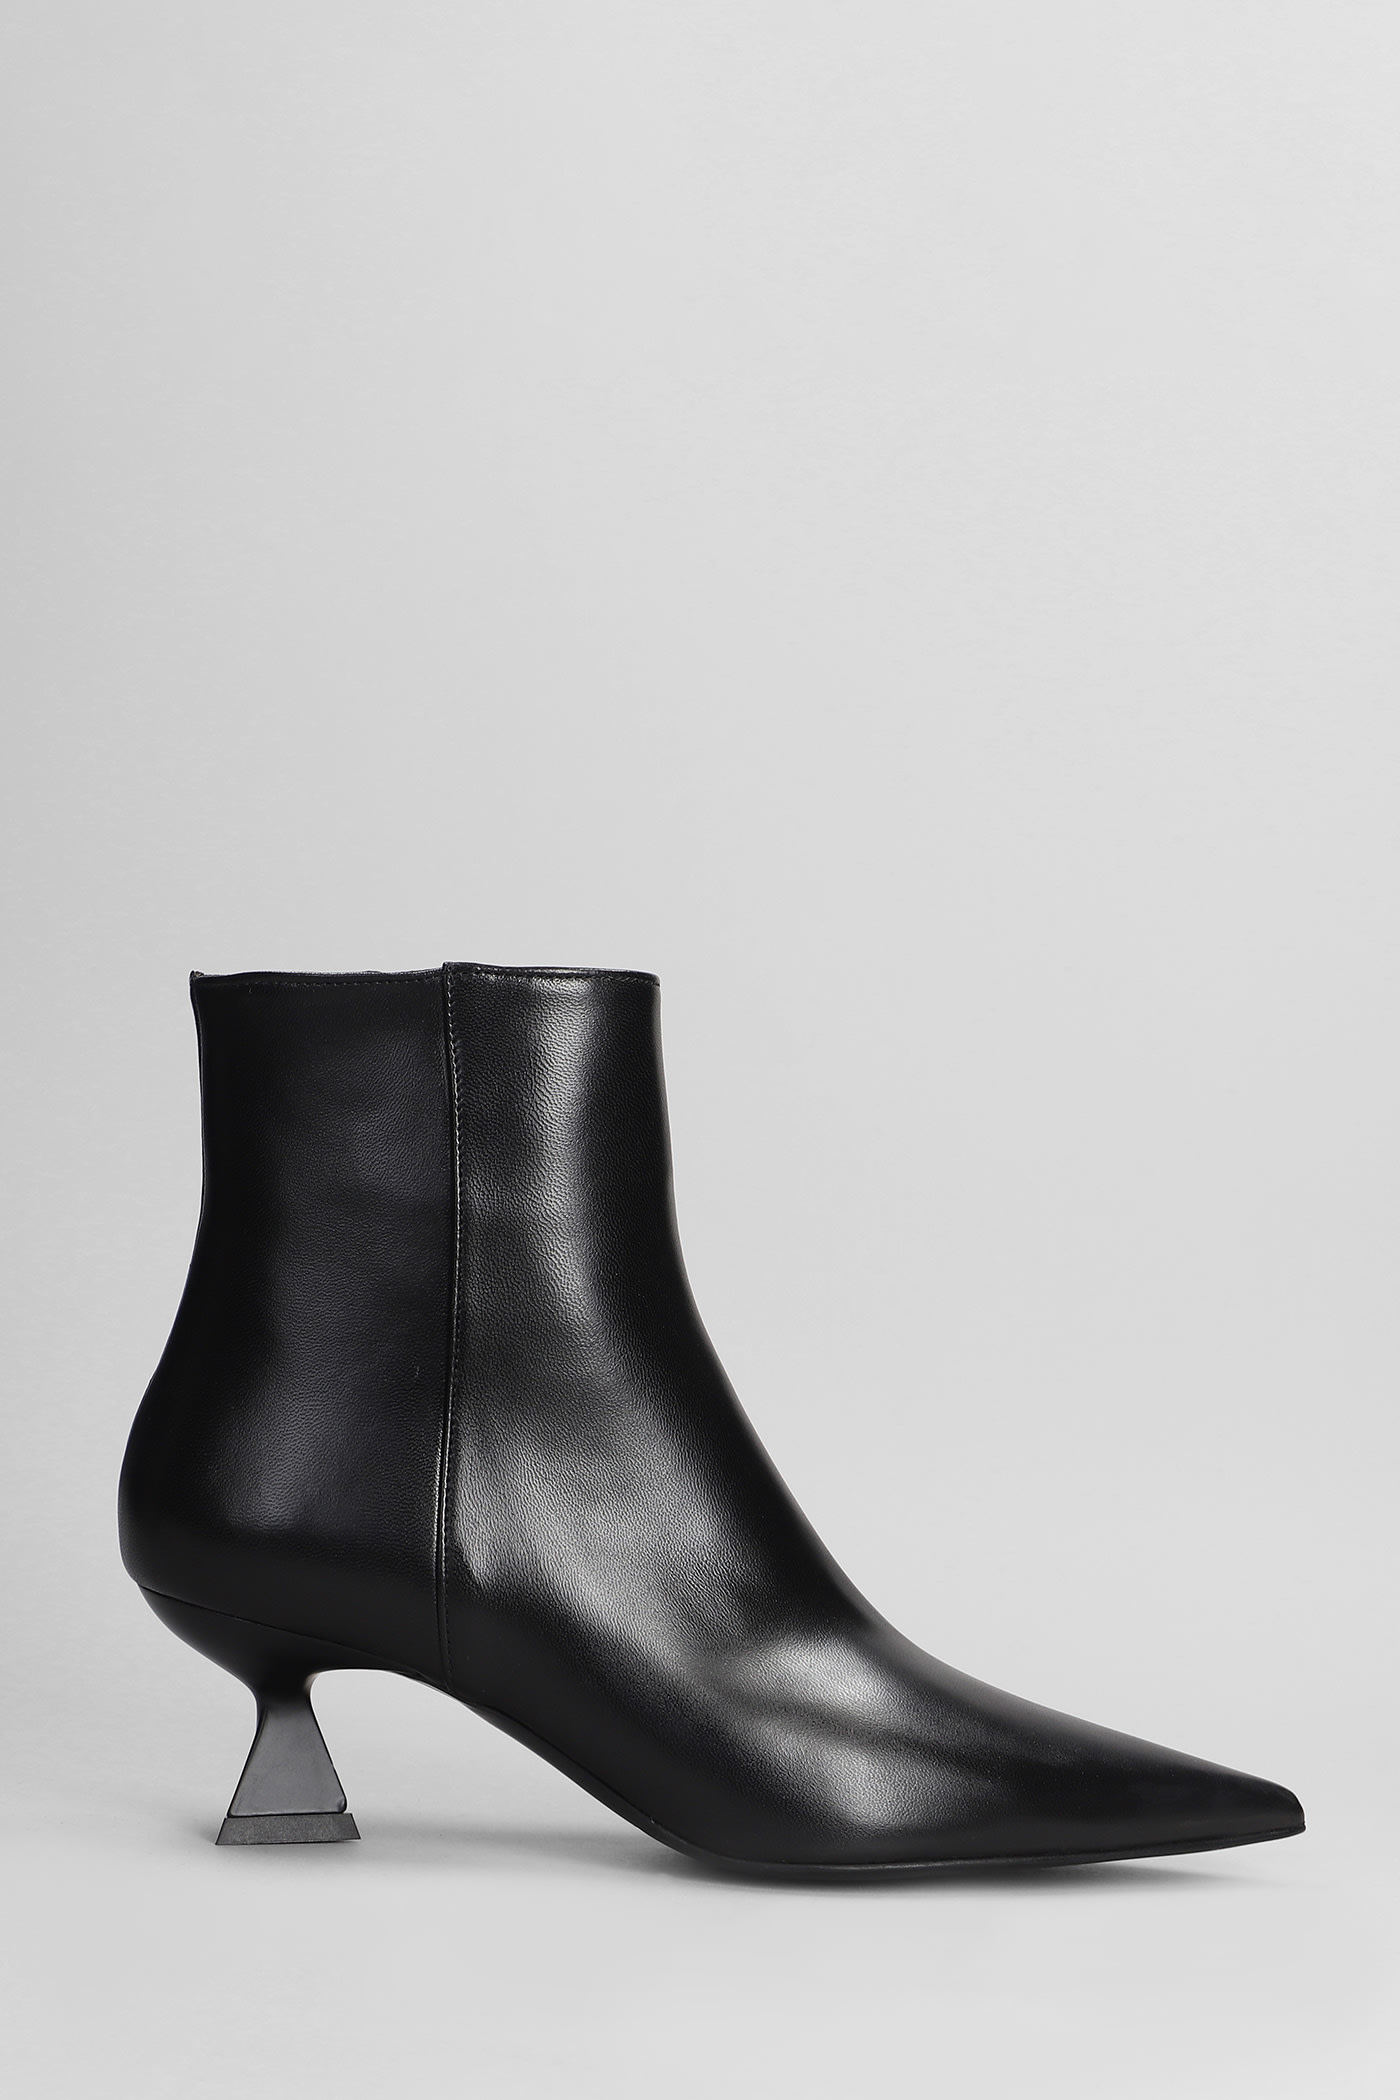 Jina High Heels Ankle Boots In Black Leather